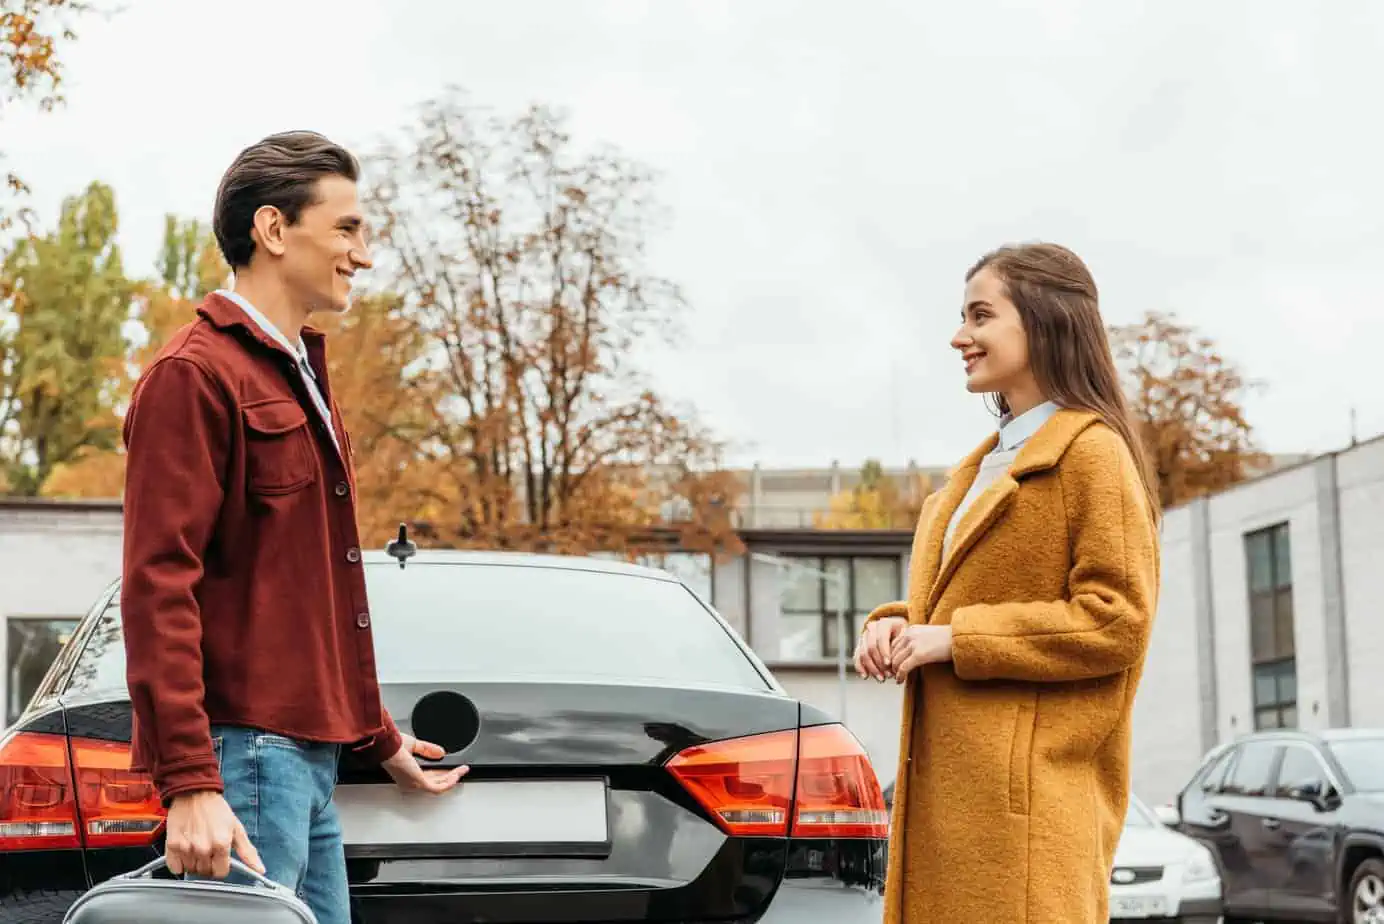 A man and a woman standing next to a car